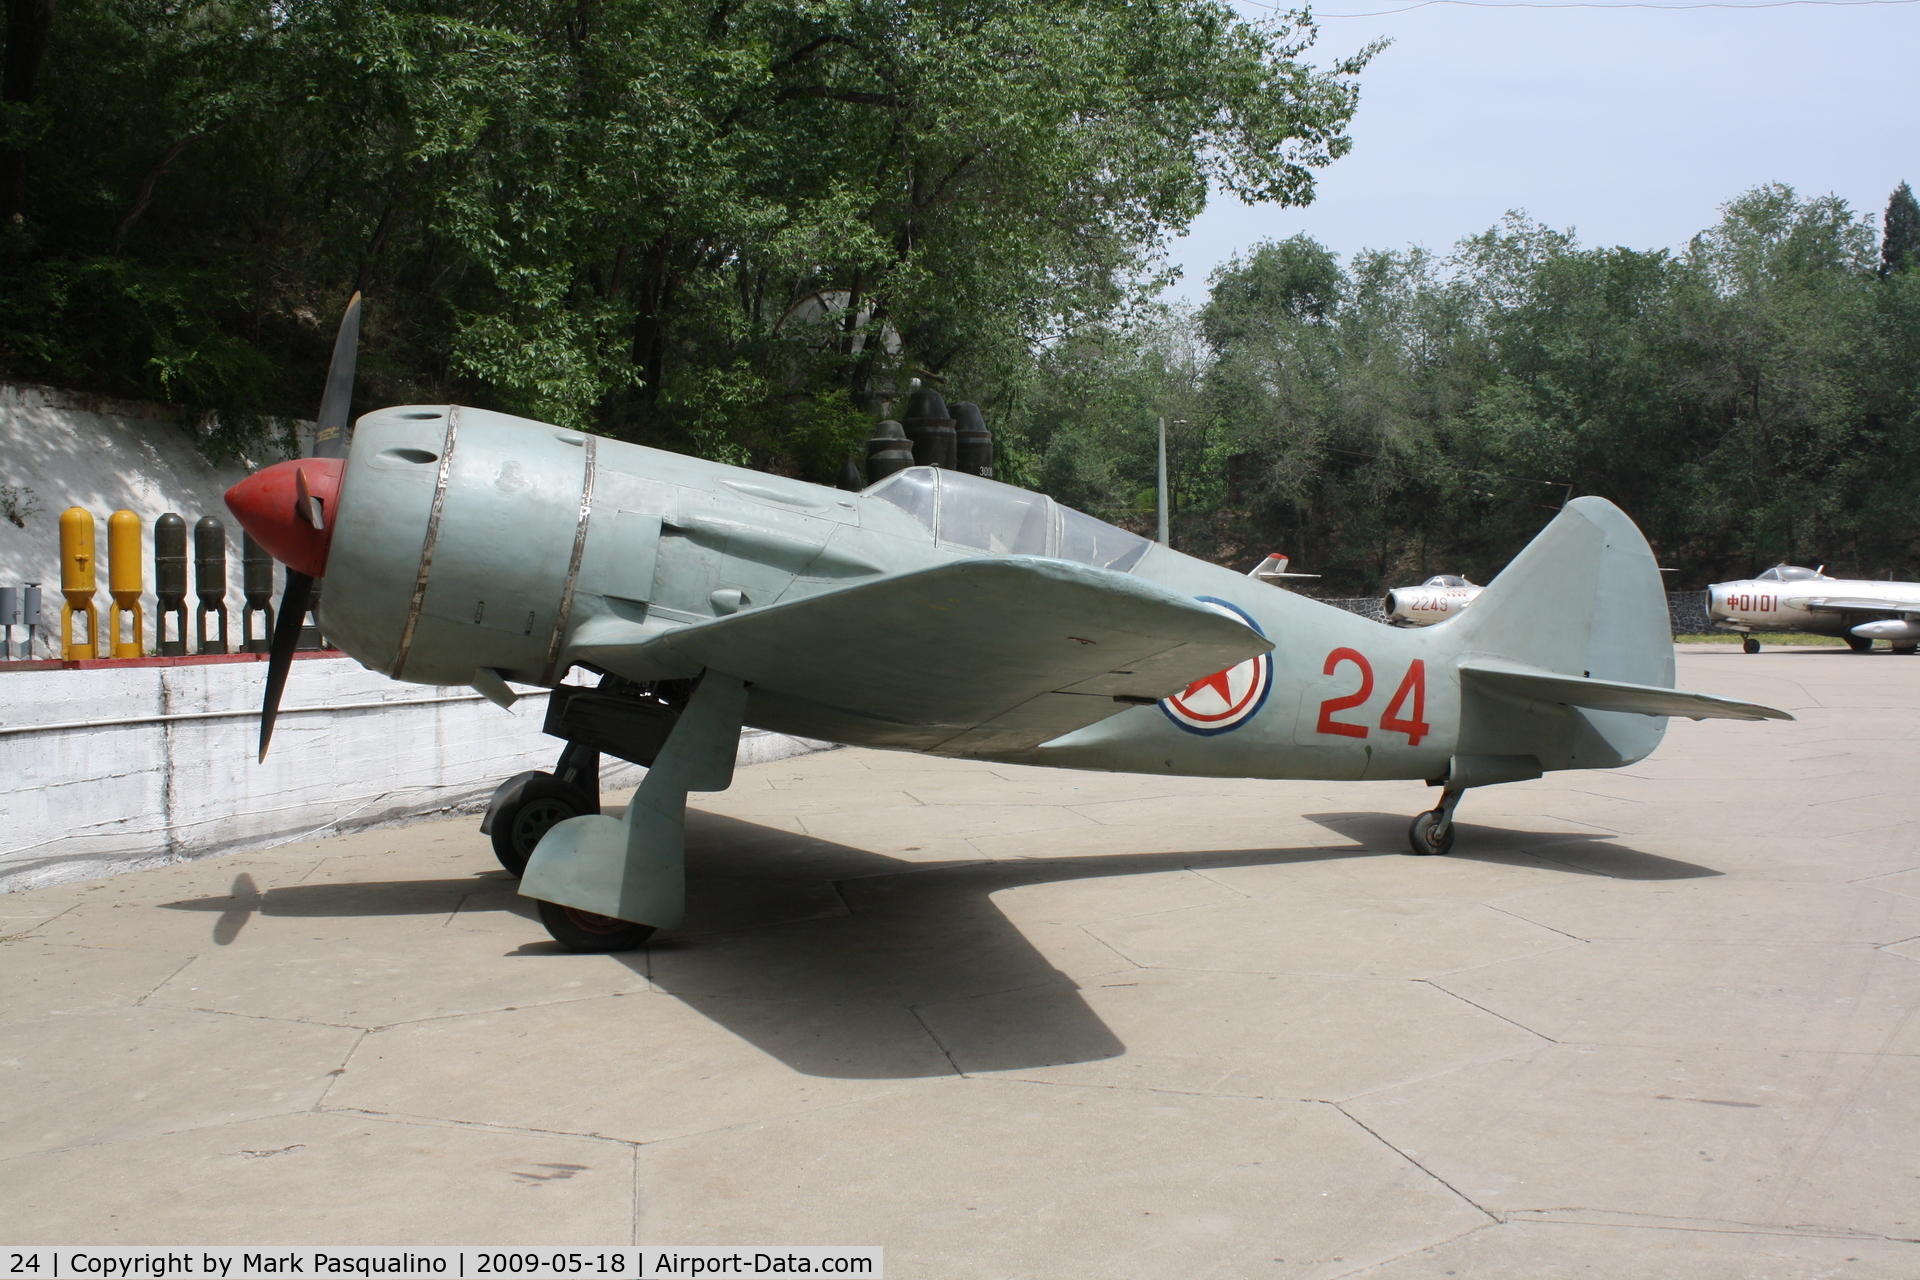 24, Lavochkin La-11 Fang C/N Not found 24, La-11  Located at Datangshan, China